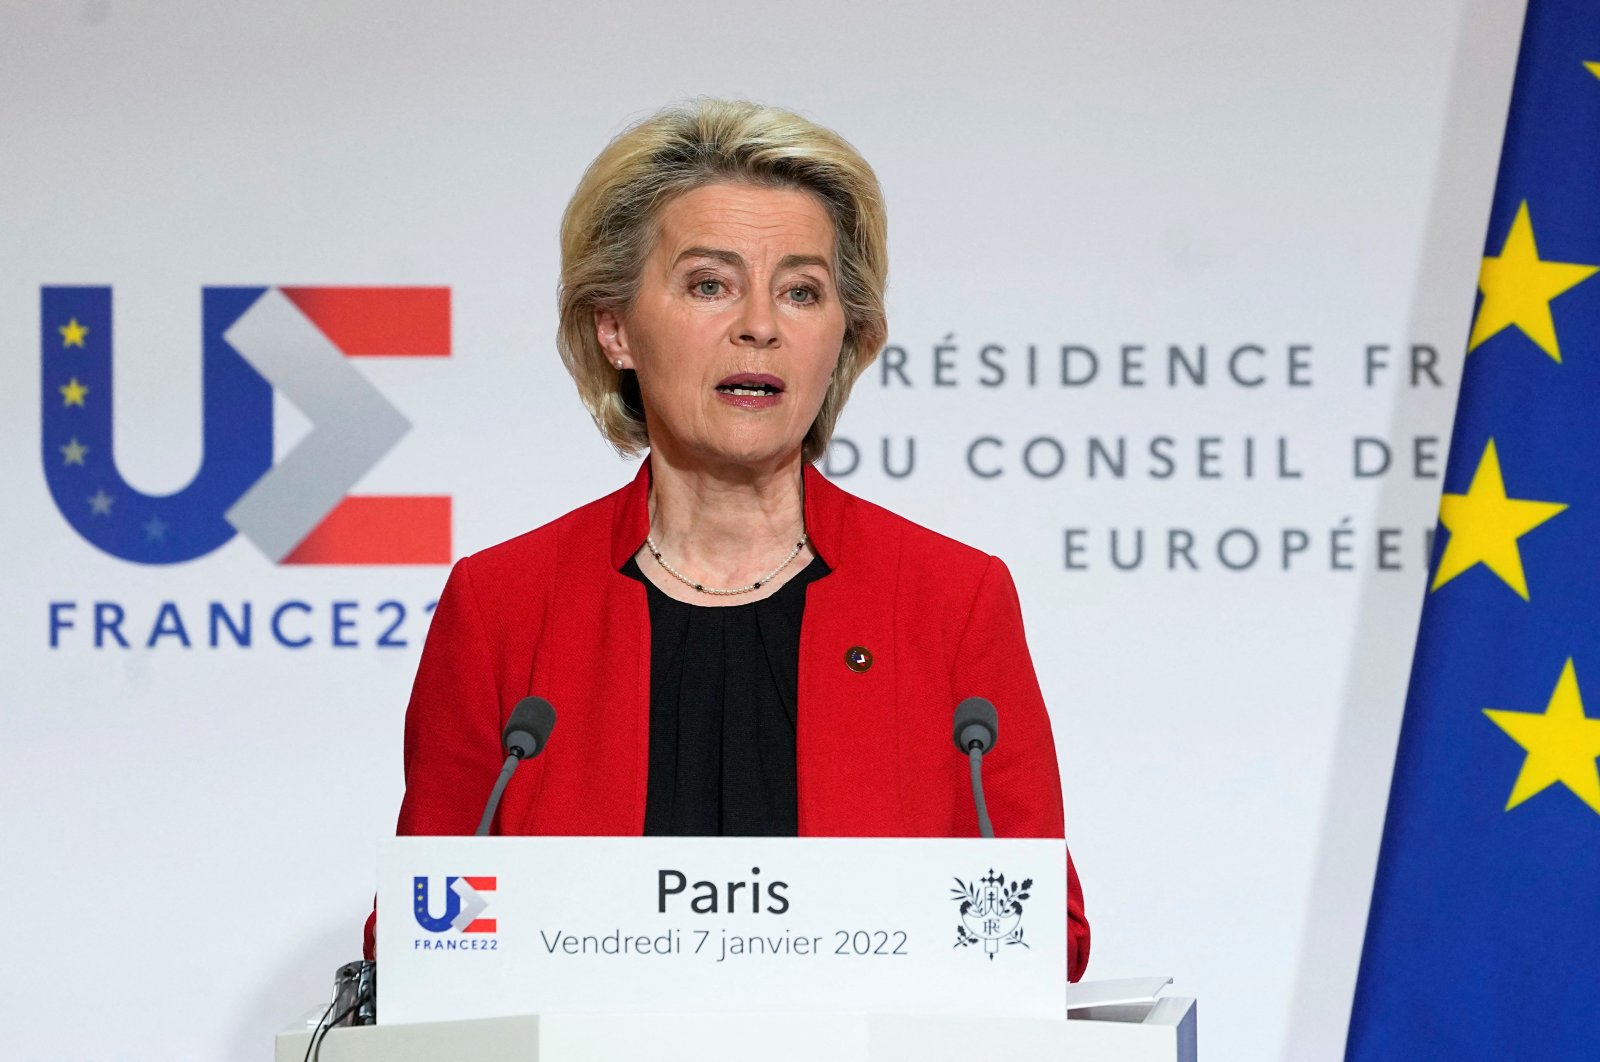 European Commission President Ursula von der Leyen speaks as she participates in a media conference with French President Emmanuel Macron after a meeting at the Elysee Palace in Paris, France, Jan. 7, 2022. (Reuters Photo)